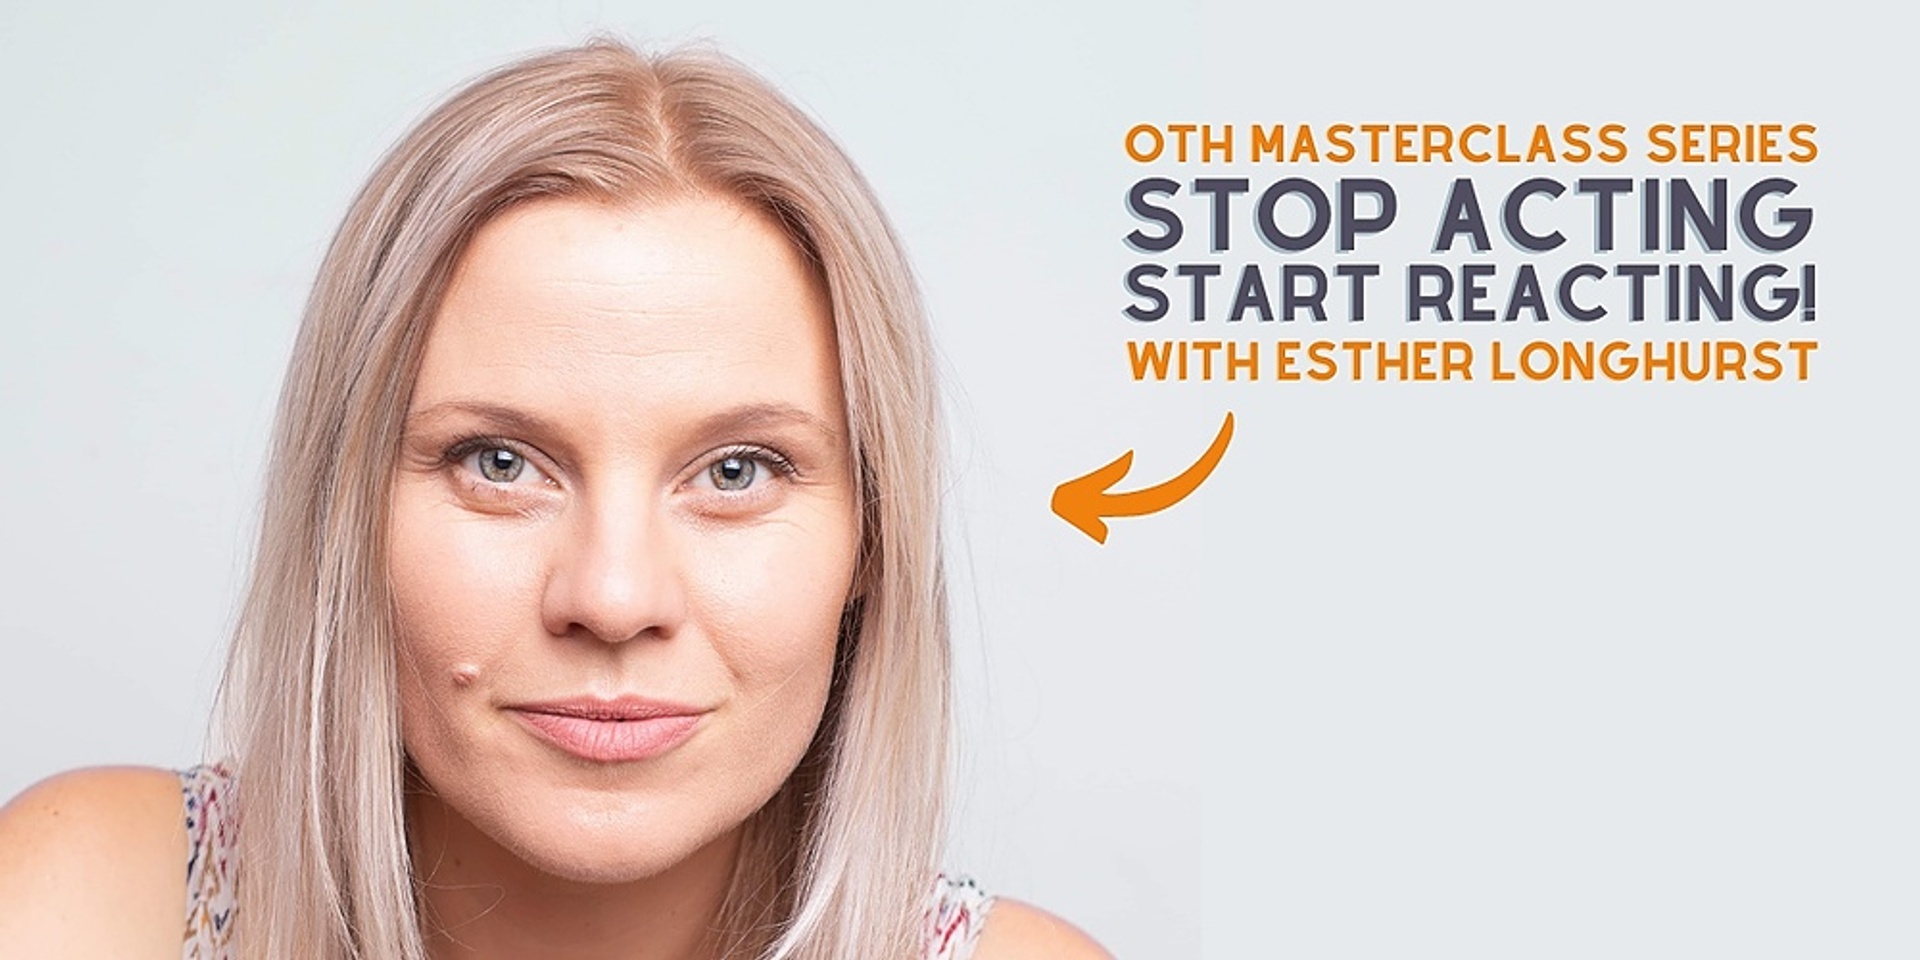 OTH Masterclass - Stop Acting, Start Reacting with Esther Longhurst